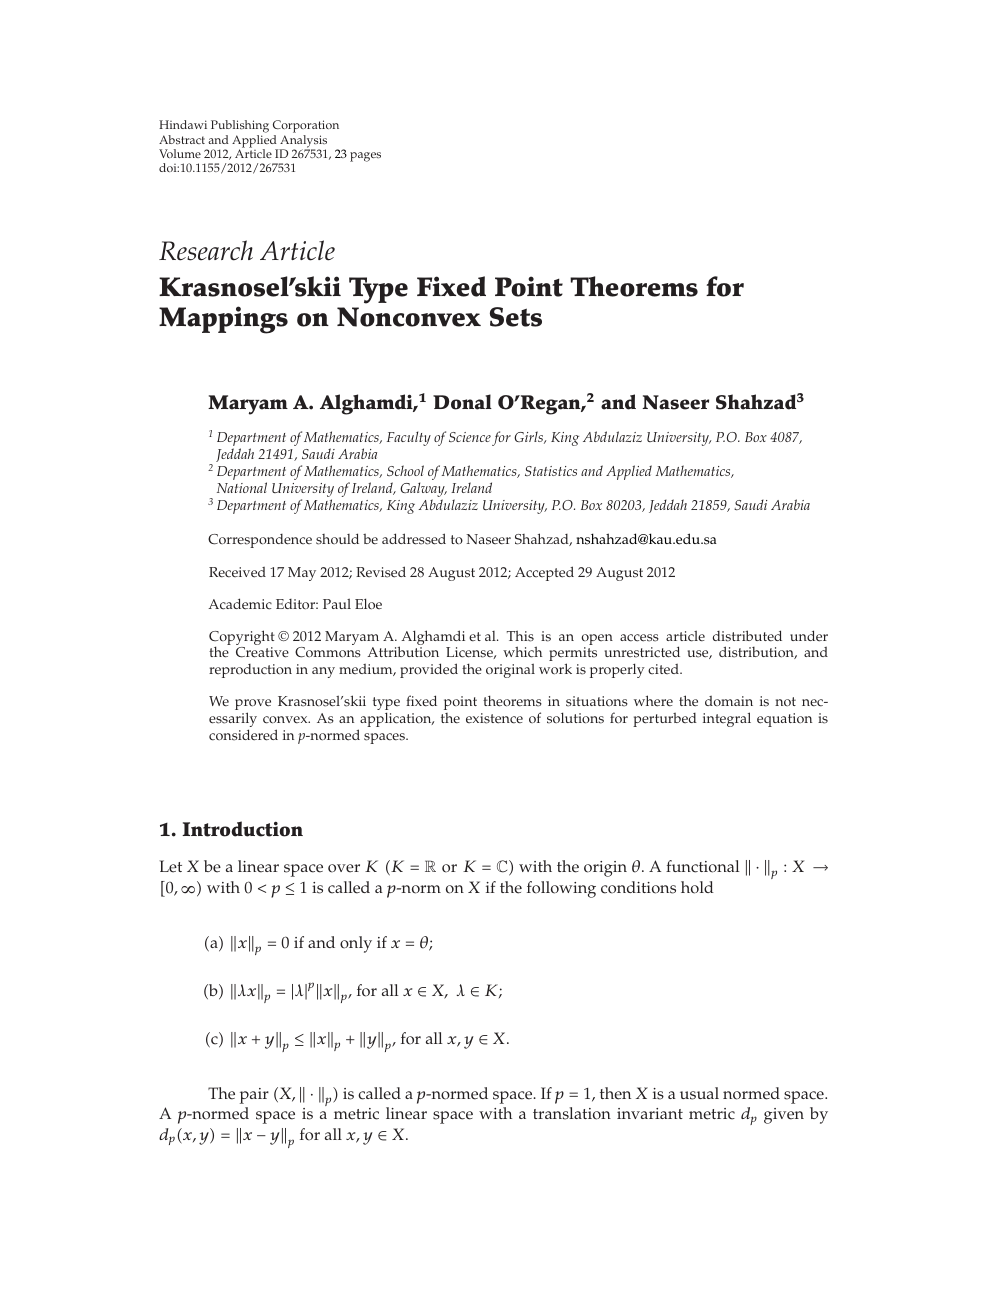 Krasnosel Skii Type Fixed Point Theorems For Mappings On Nonconvex Sets Topic Of Research Paper In Mathematics Download Scholarly Article Pdf And Read For Free On Cyberleninka Open Science Hub